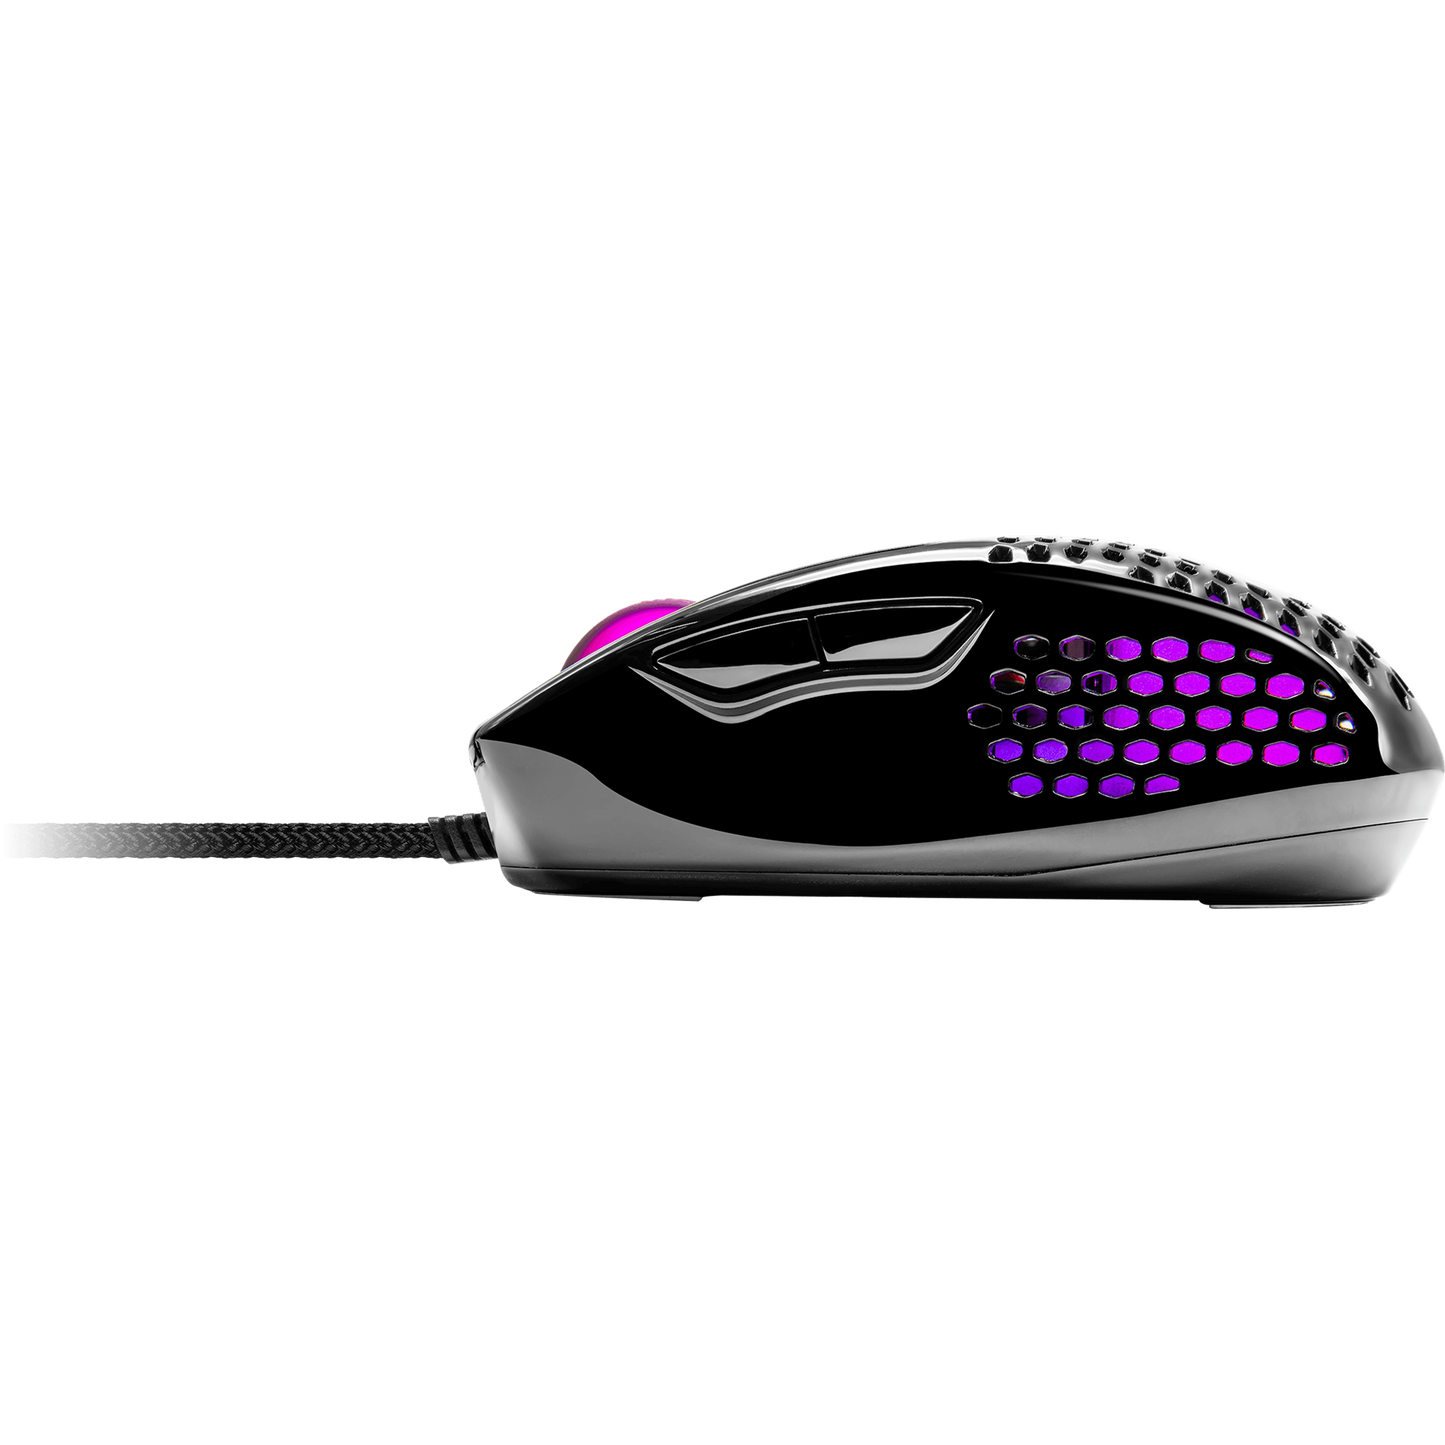 Cooler Master MM720 - Lightweight RGB Gaming Mouse - Glossy Black